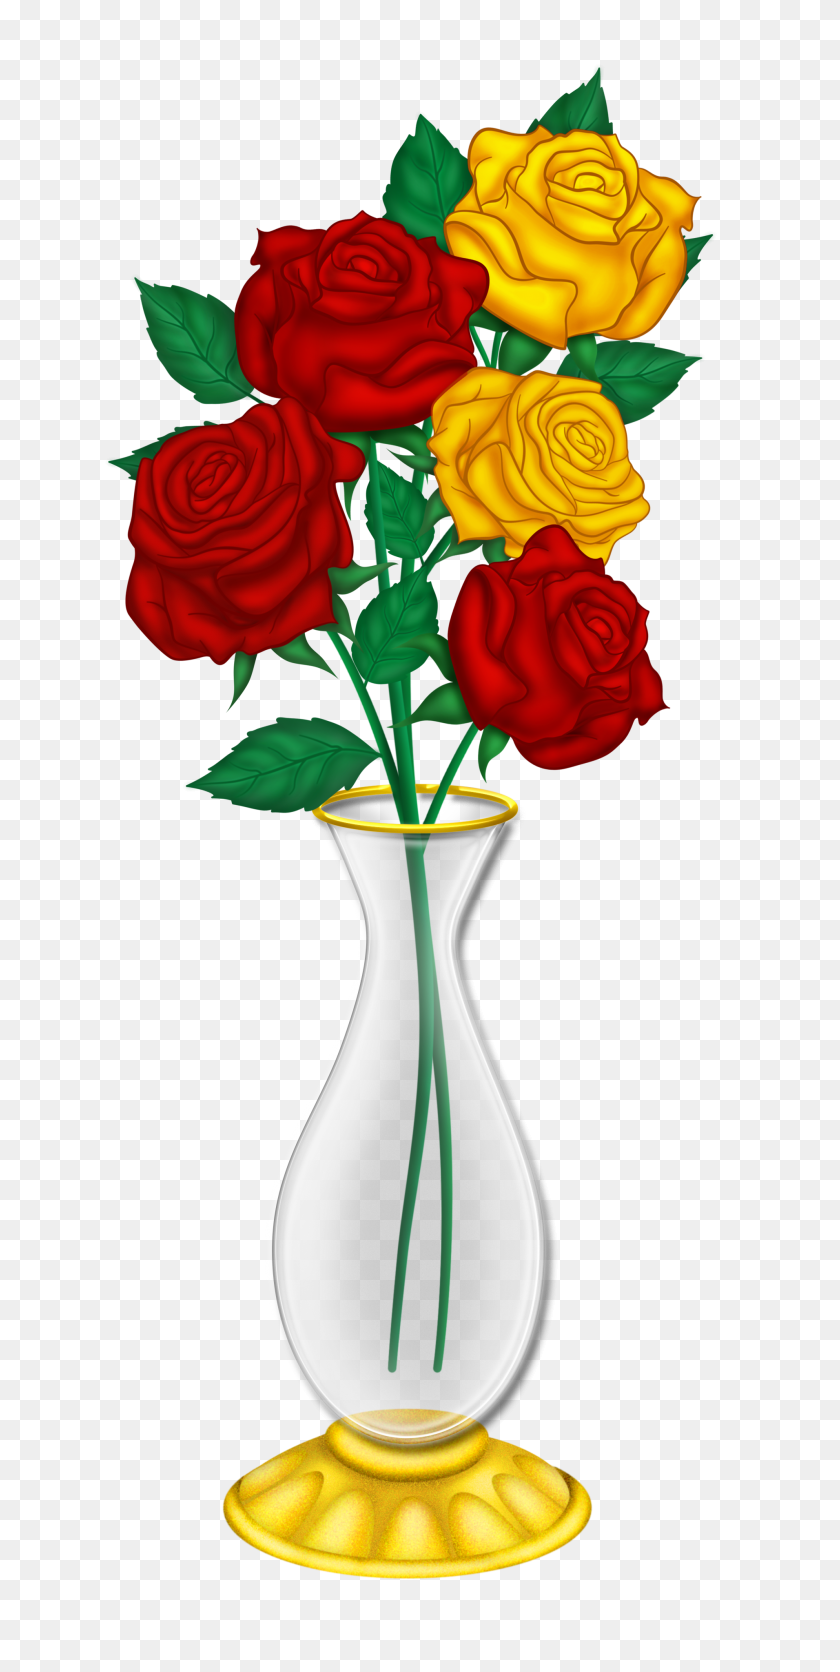 1912x3952 Beautiful Vase With Red And Yellow Roses Png Gallery - Vase PNG